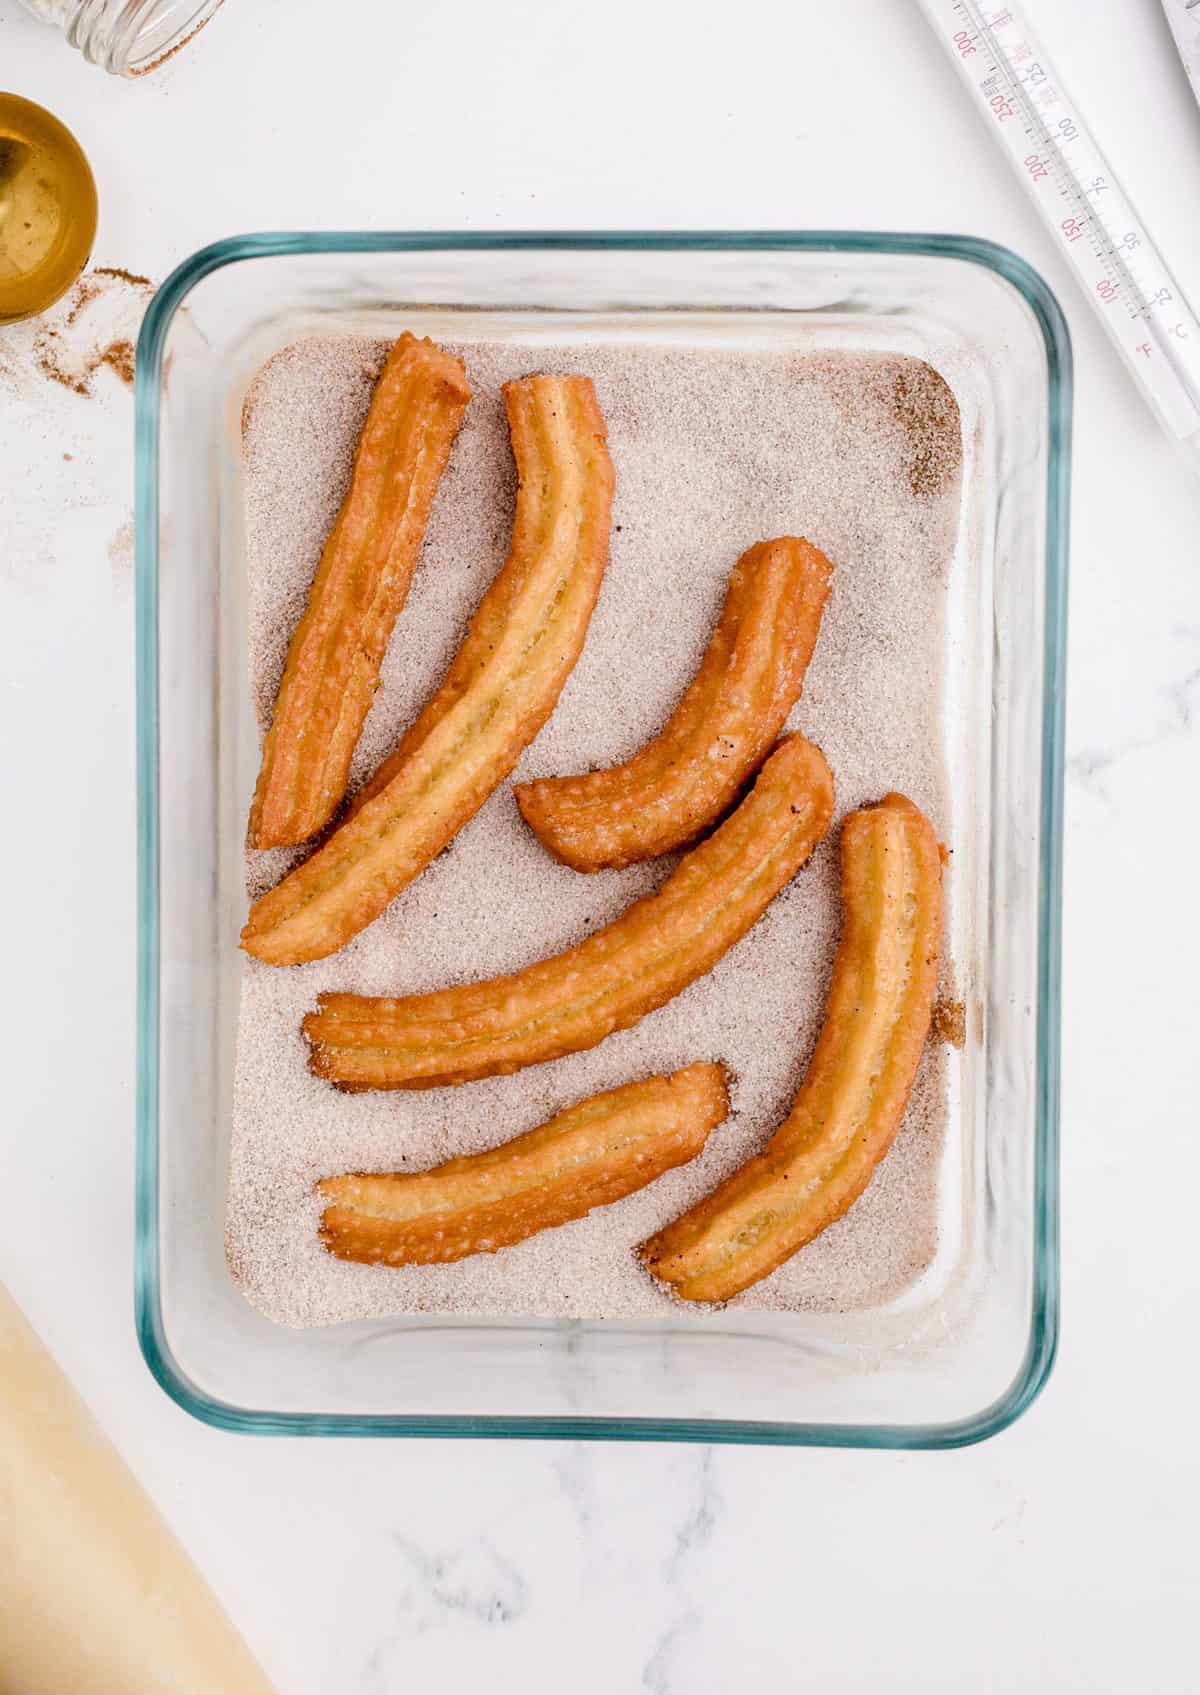 Placing fried churros in pastry dish with cinnamon and sugar. 